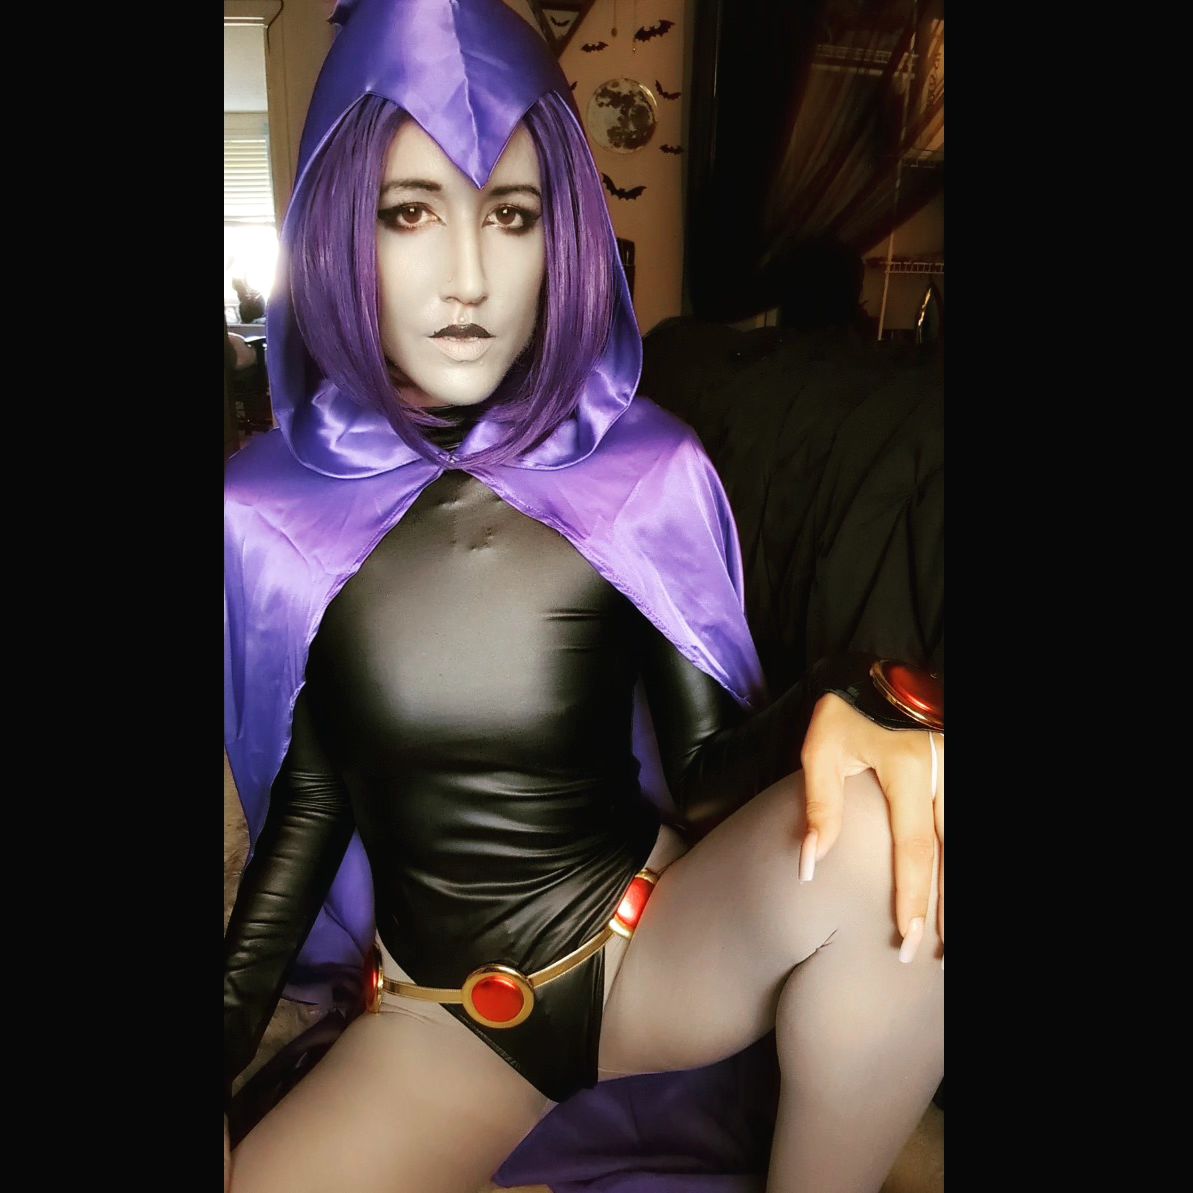 Can't see without my glasses 😅 but here's Raven #ravencosplay #raventeentitans #Raven